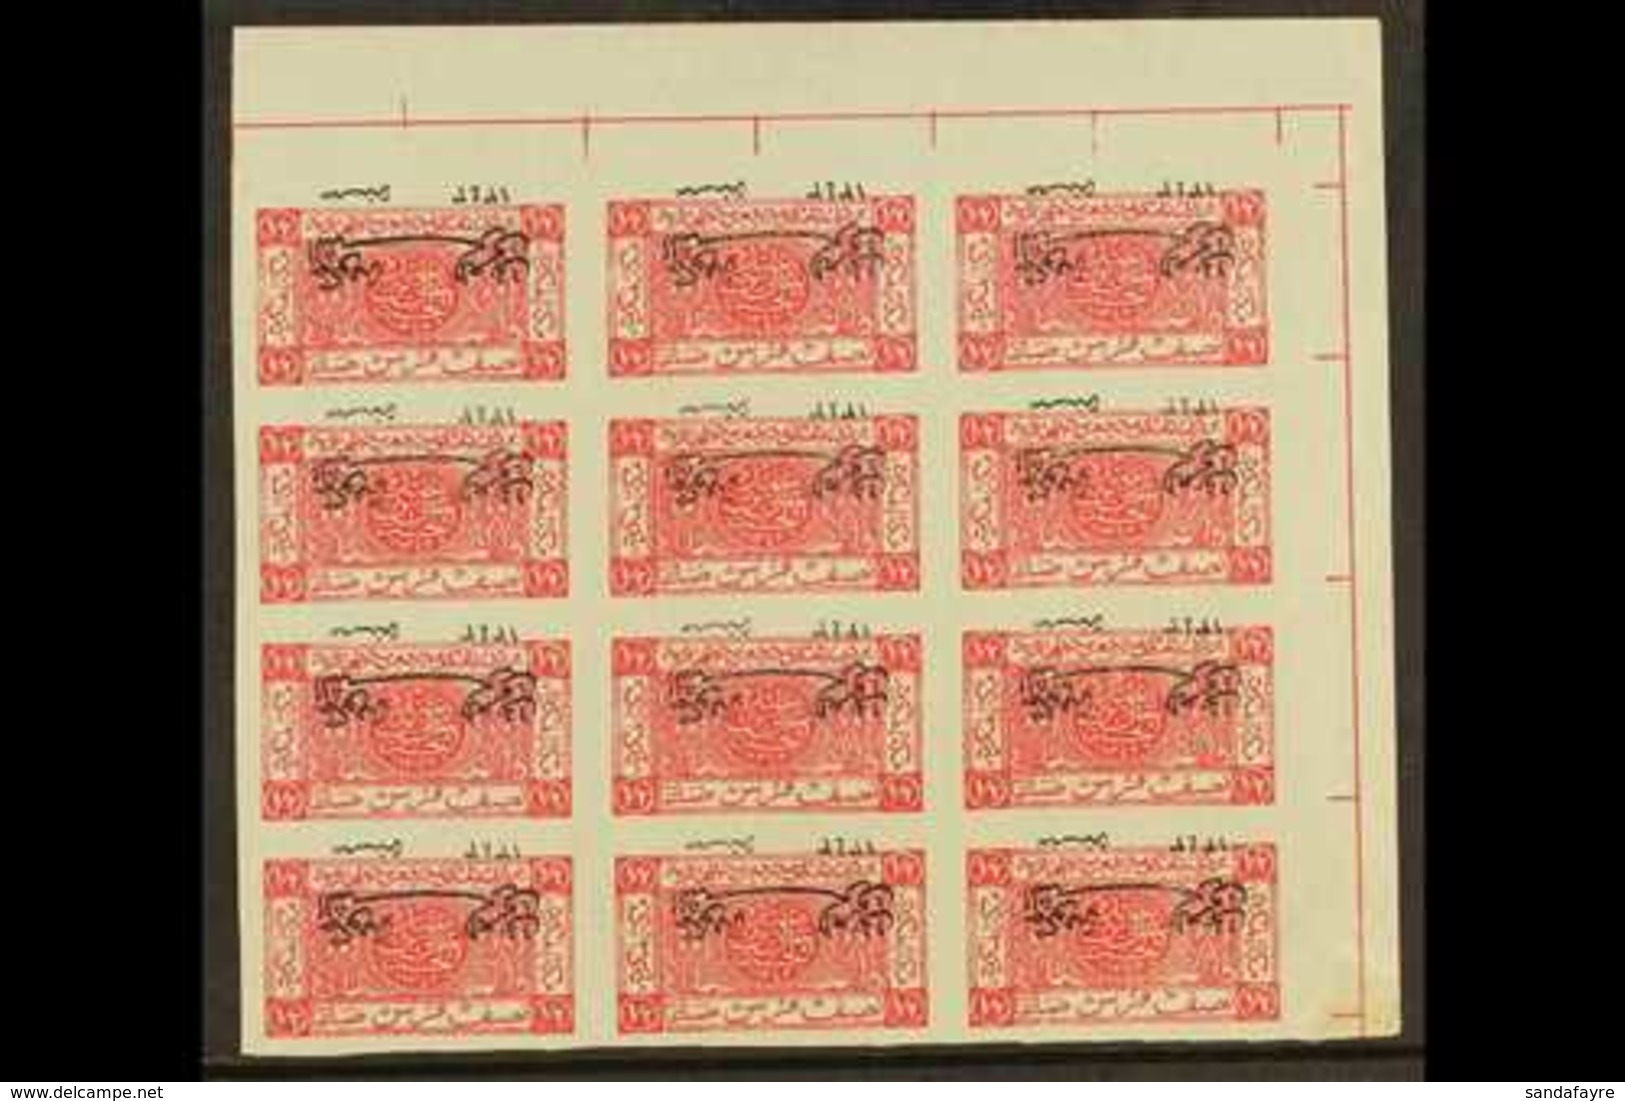 1925 2 Aug) ½p Carmine IMPERF WITH INVERTED OVERPRINT Variety, As SG 137a, Fine Never Hinged Mint Upper Right Marginal B - Jordan